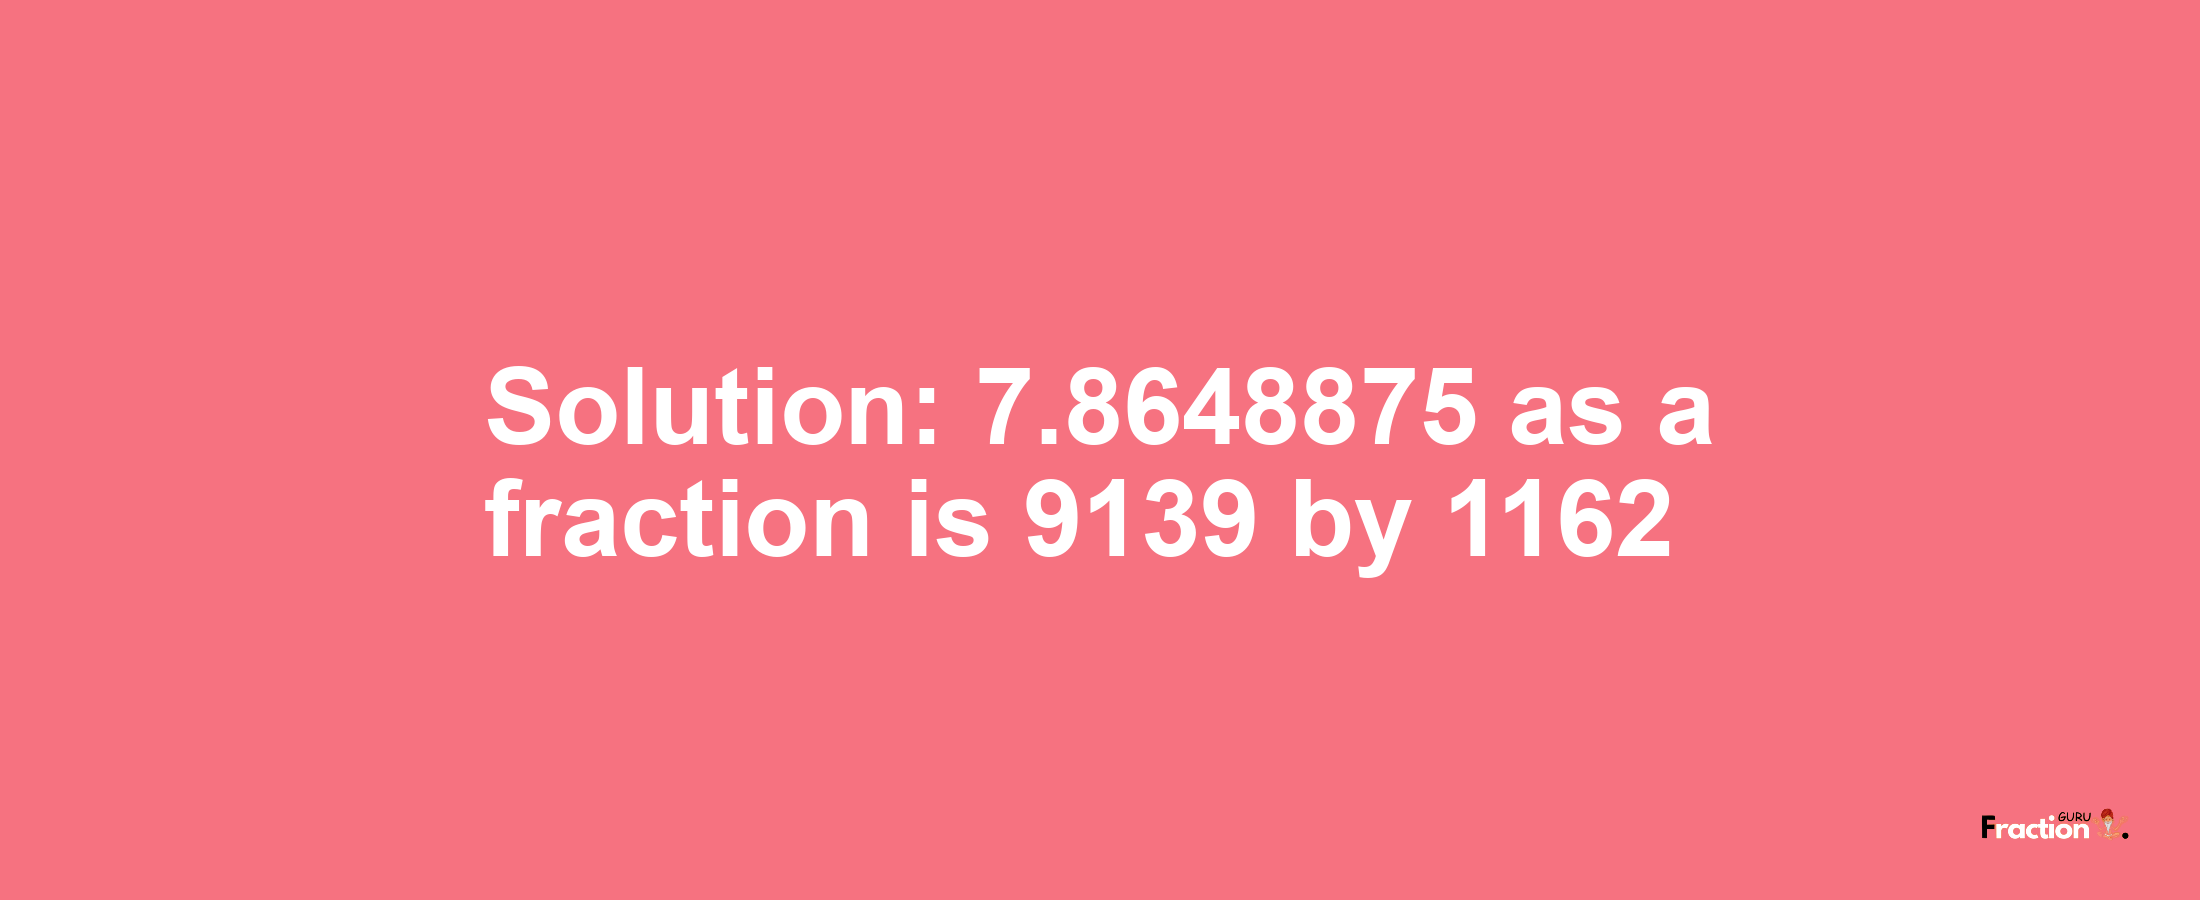 Solution:7.8648875 as a fraction is 9139/1162